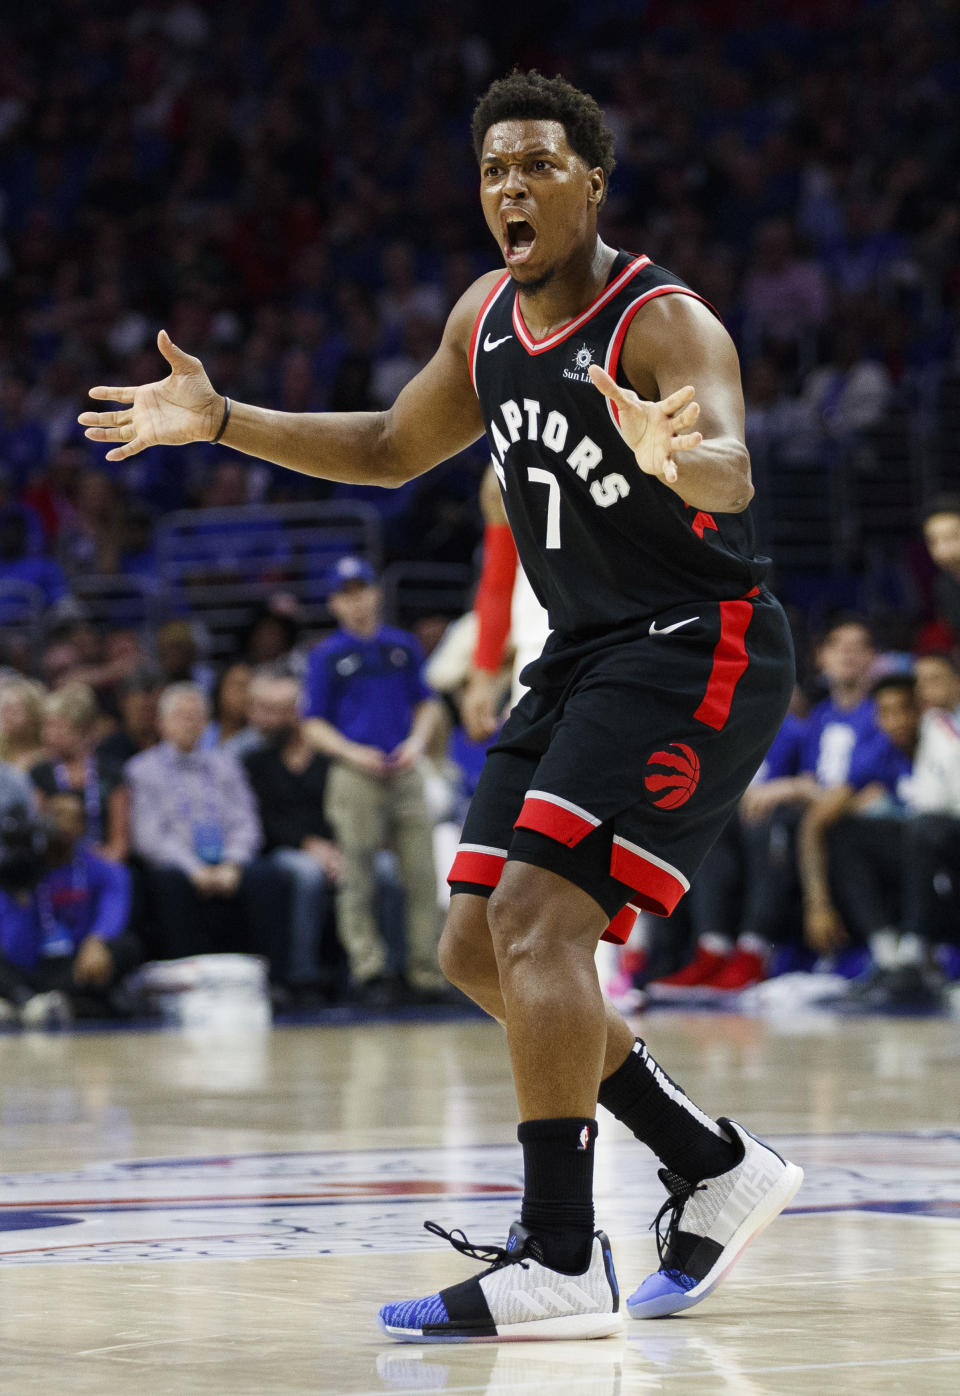 Toronto Raptors' Kyle Lowry reacts to a call during the first half of Game 3 of the team's second-round NBA basketball playoff series against the Philadelphia 76ers, Thursday, May 2, 2019, in Philadelphia. The 76ers won 116-95. (AP Photo/Chris Szagola)